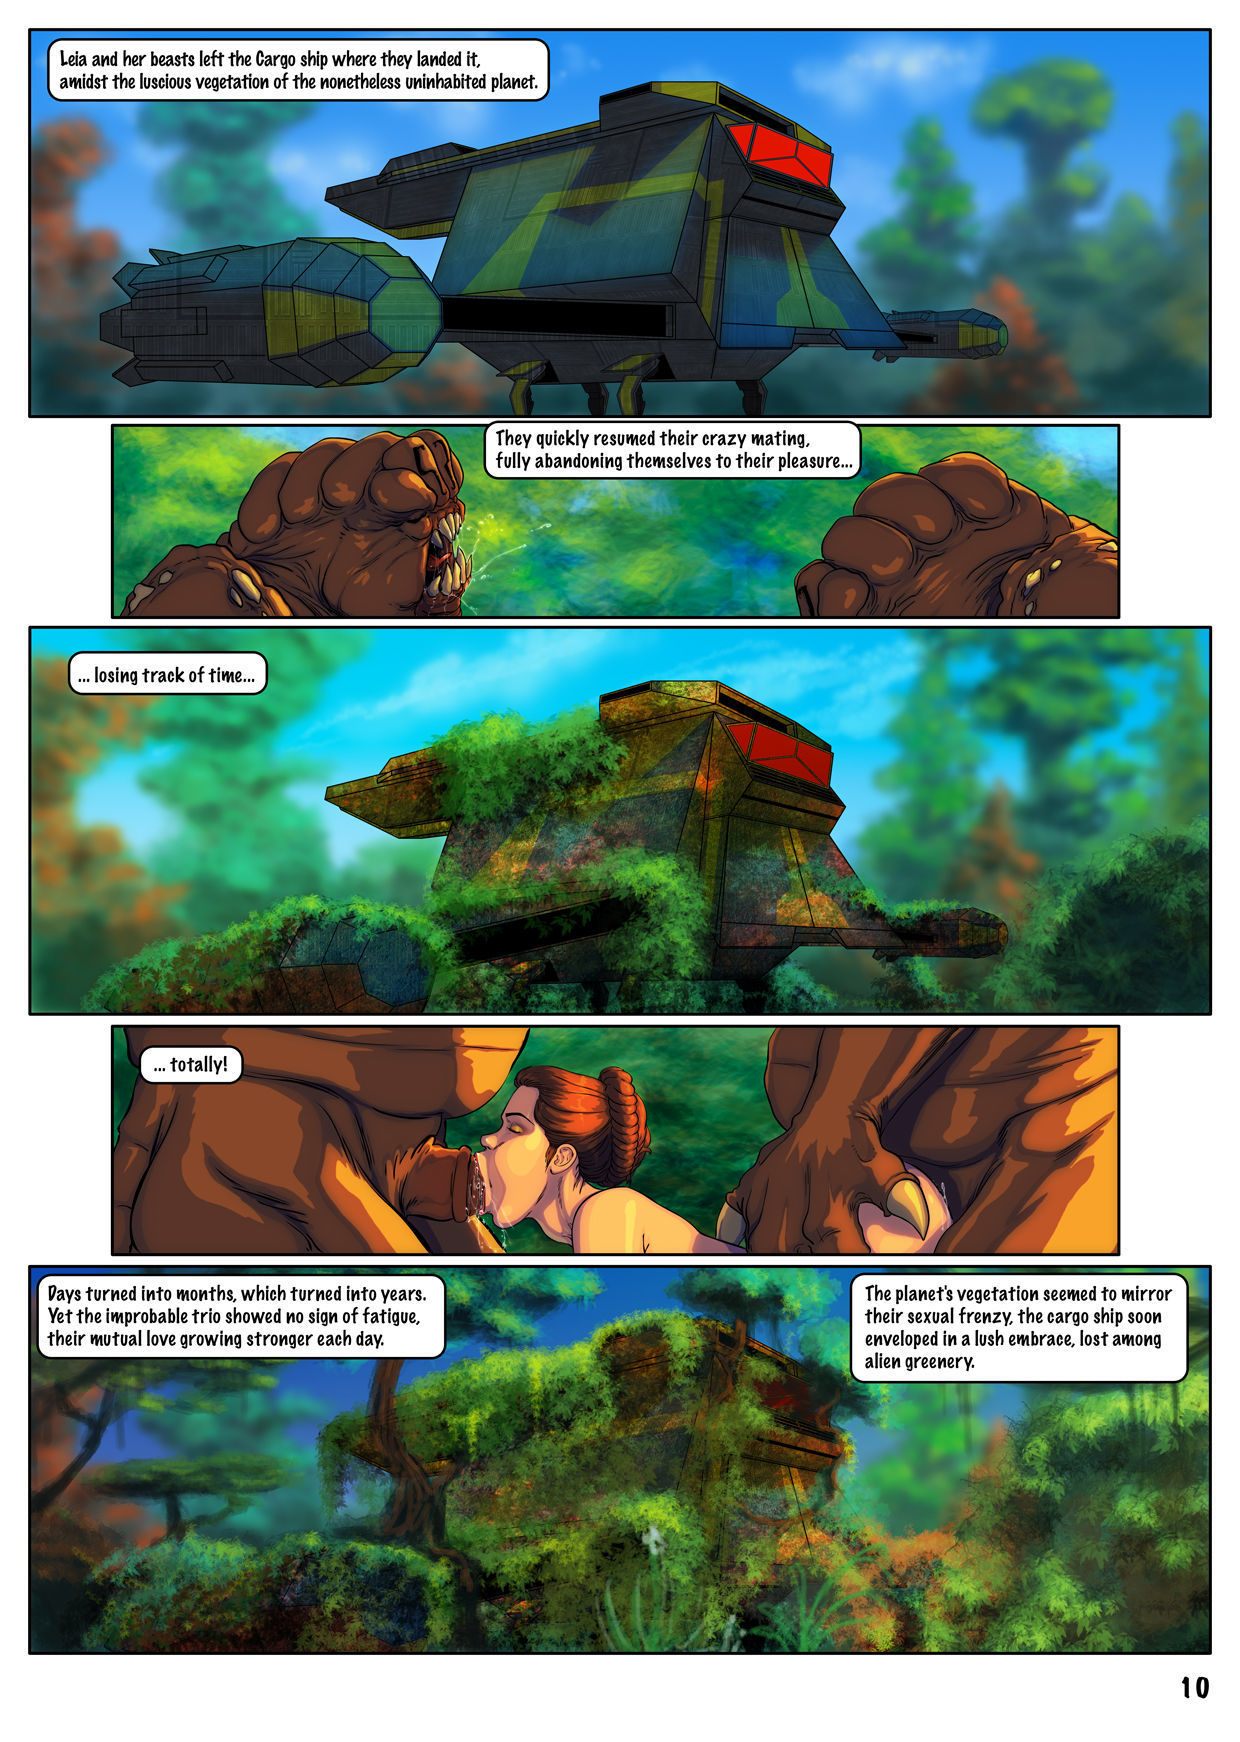 Studio Pirrate - Back to Rancorrs page 10